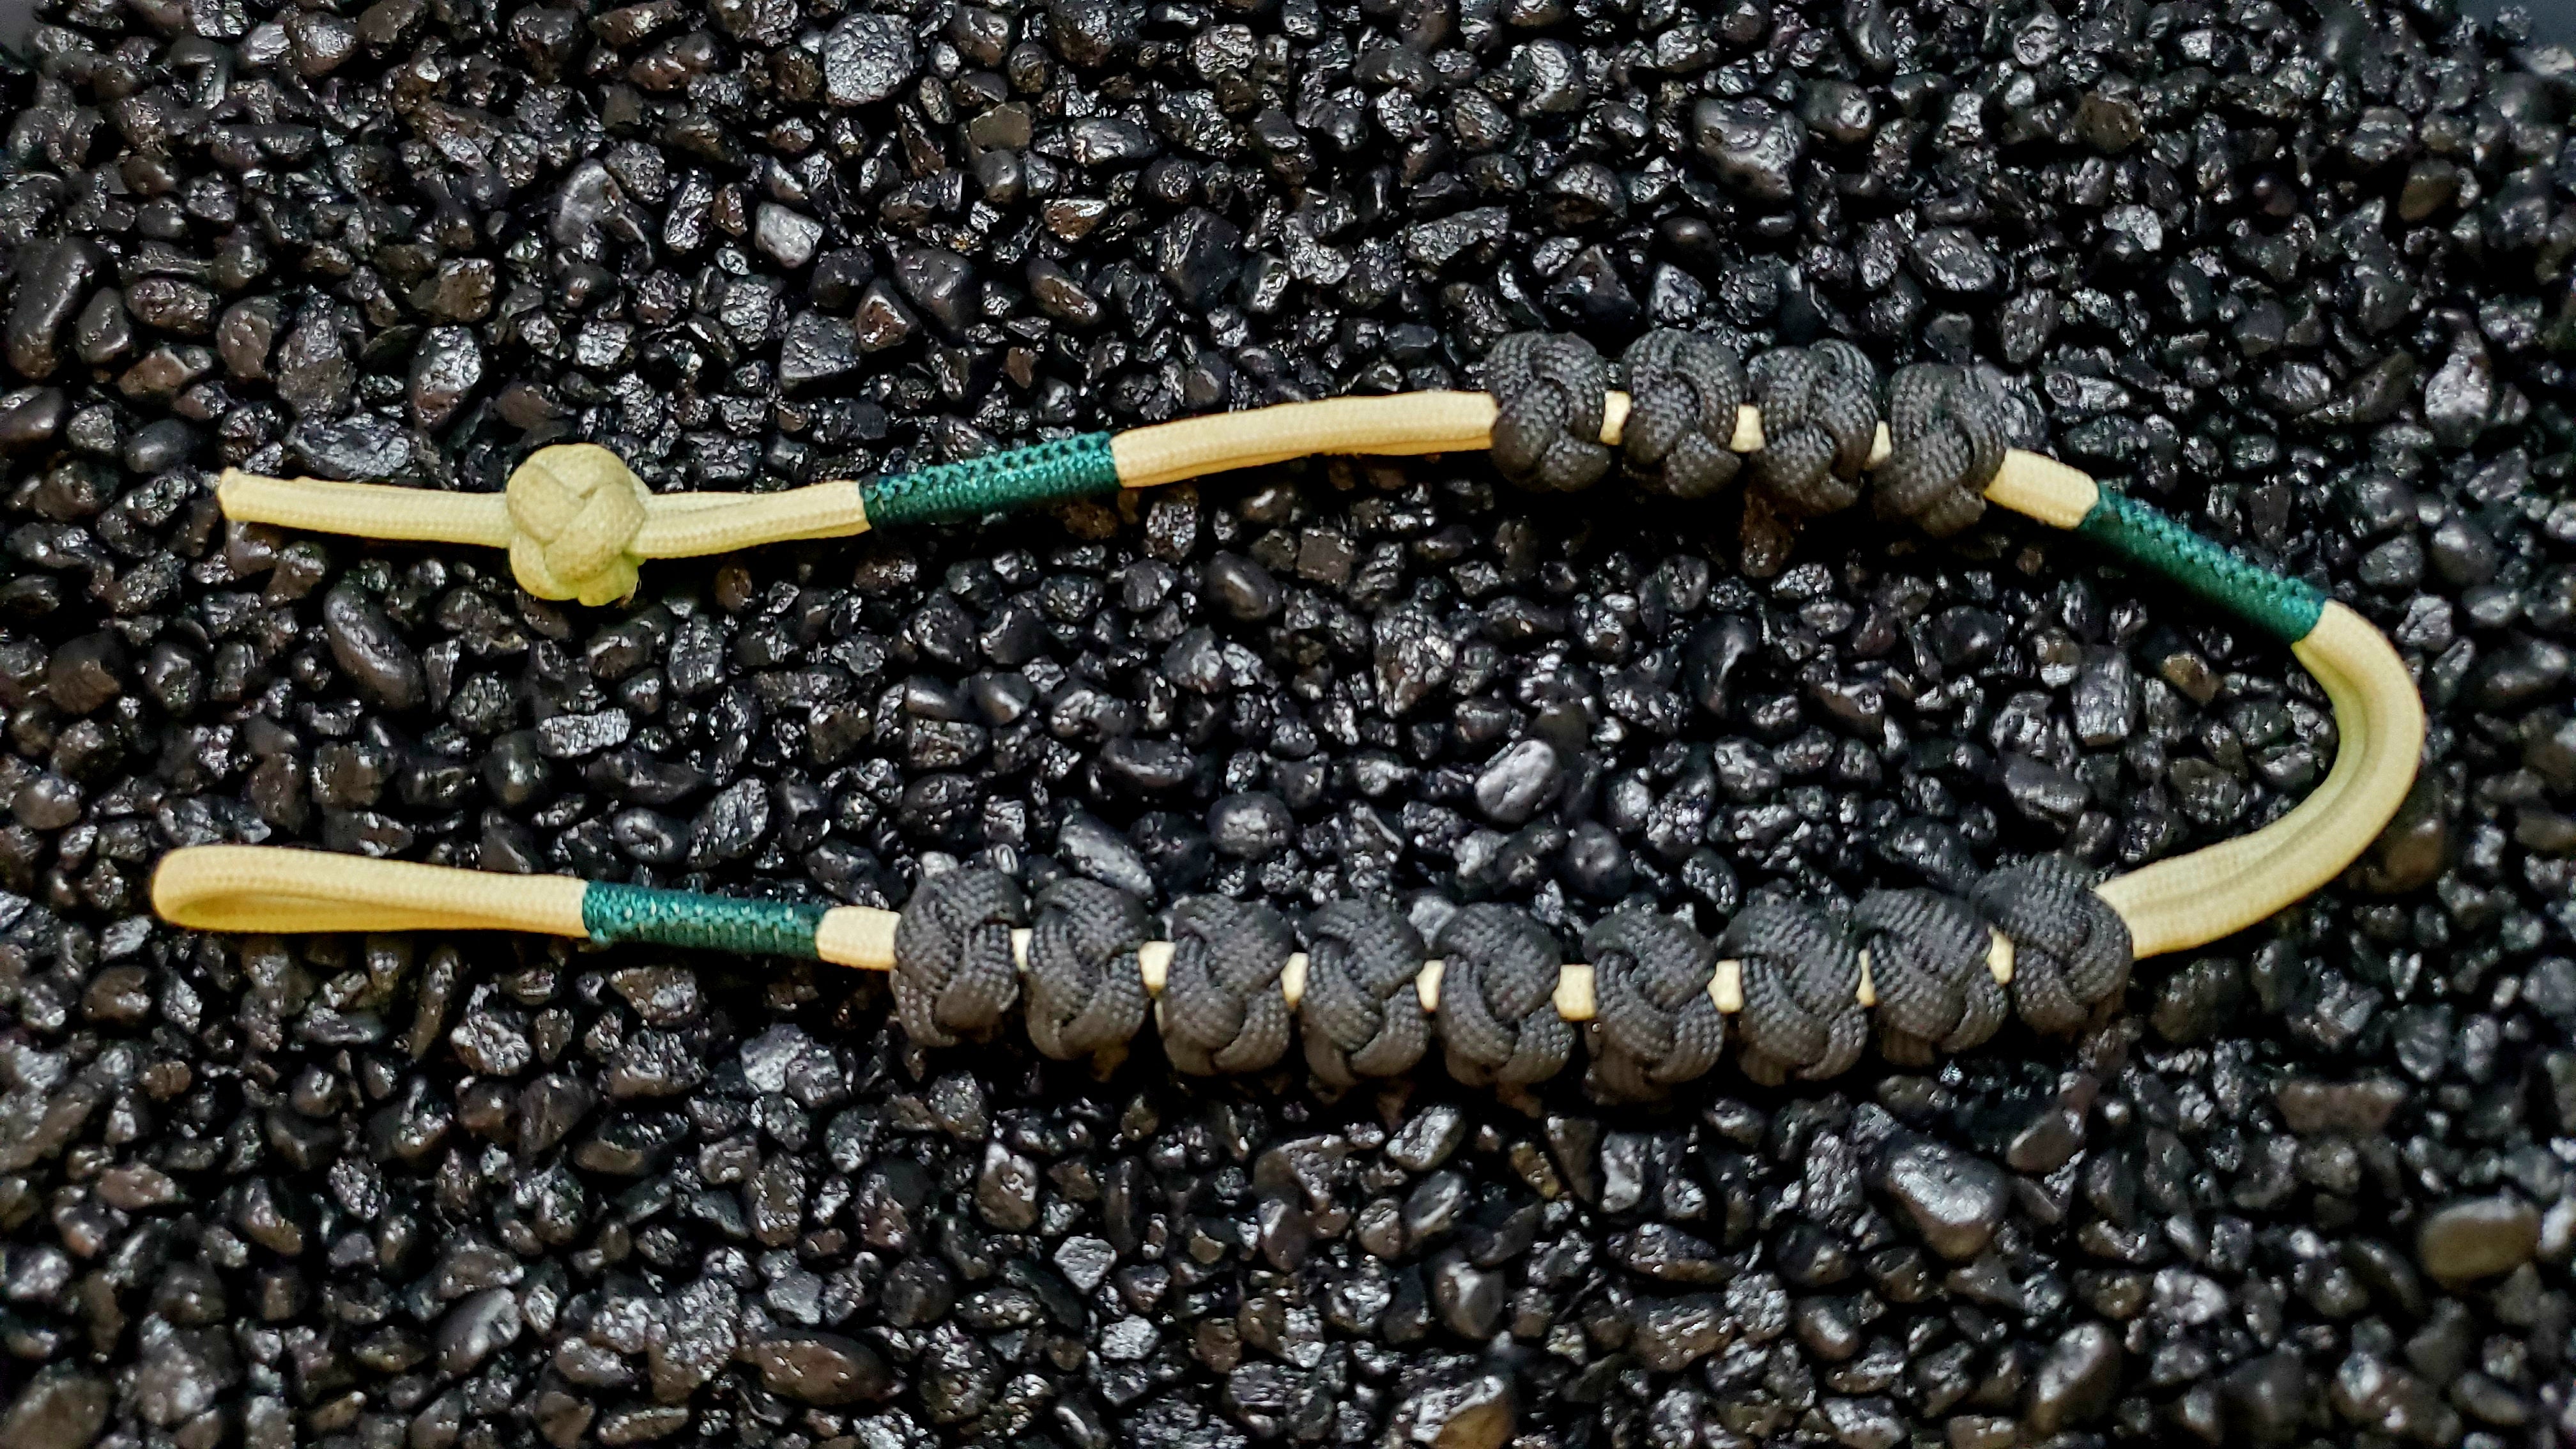 Paracord Pace Counter Ranger Beads (Black/Glow-In-The-Dark)